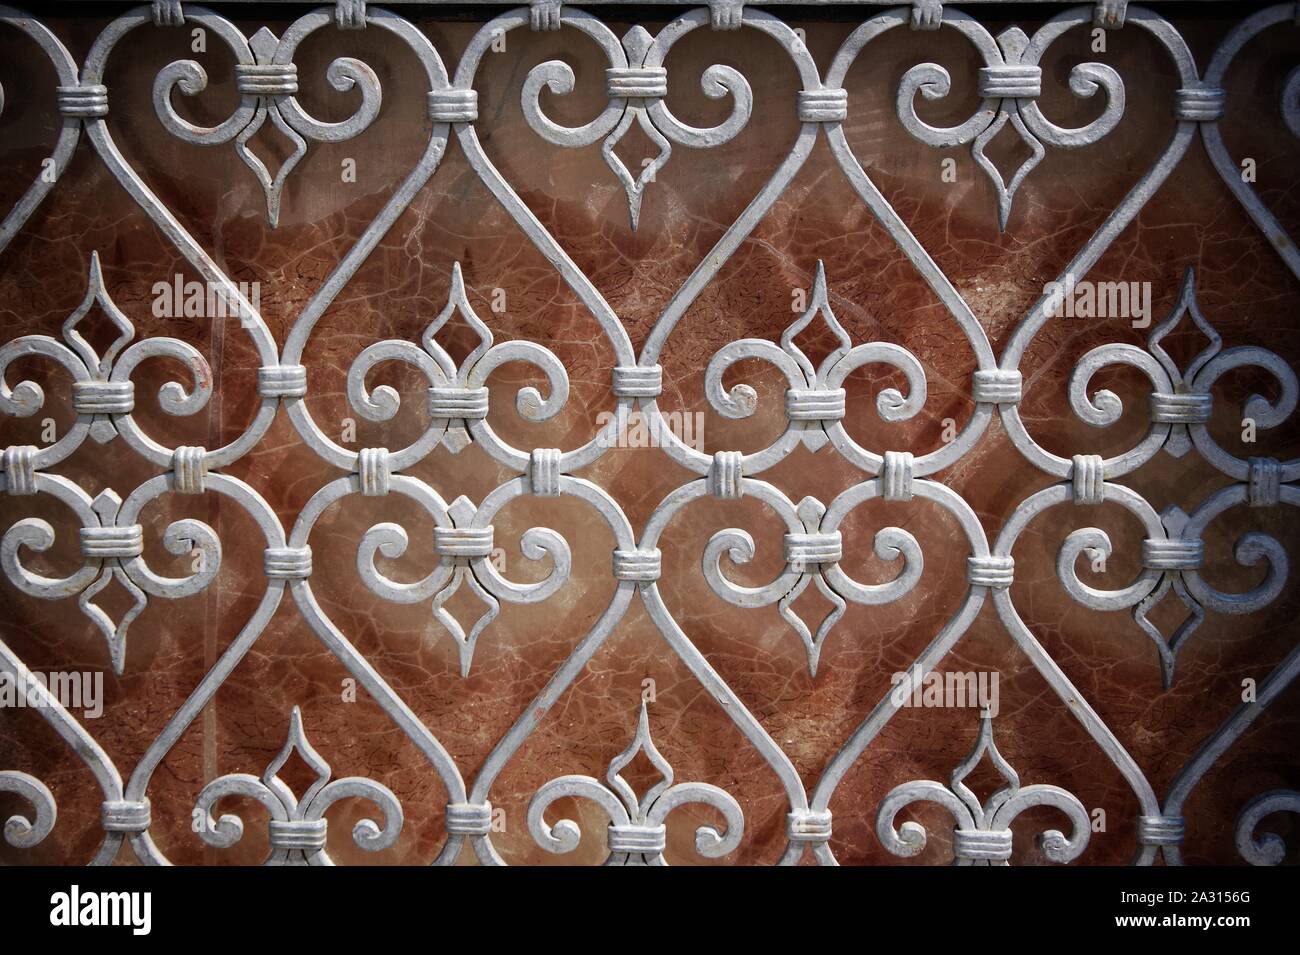 Venetian ornate window grille with heart design. Stock Photo